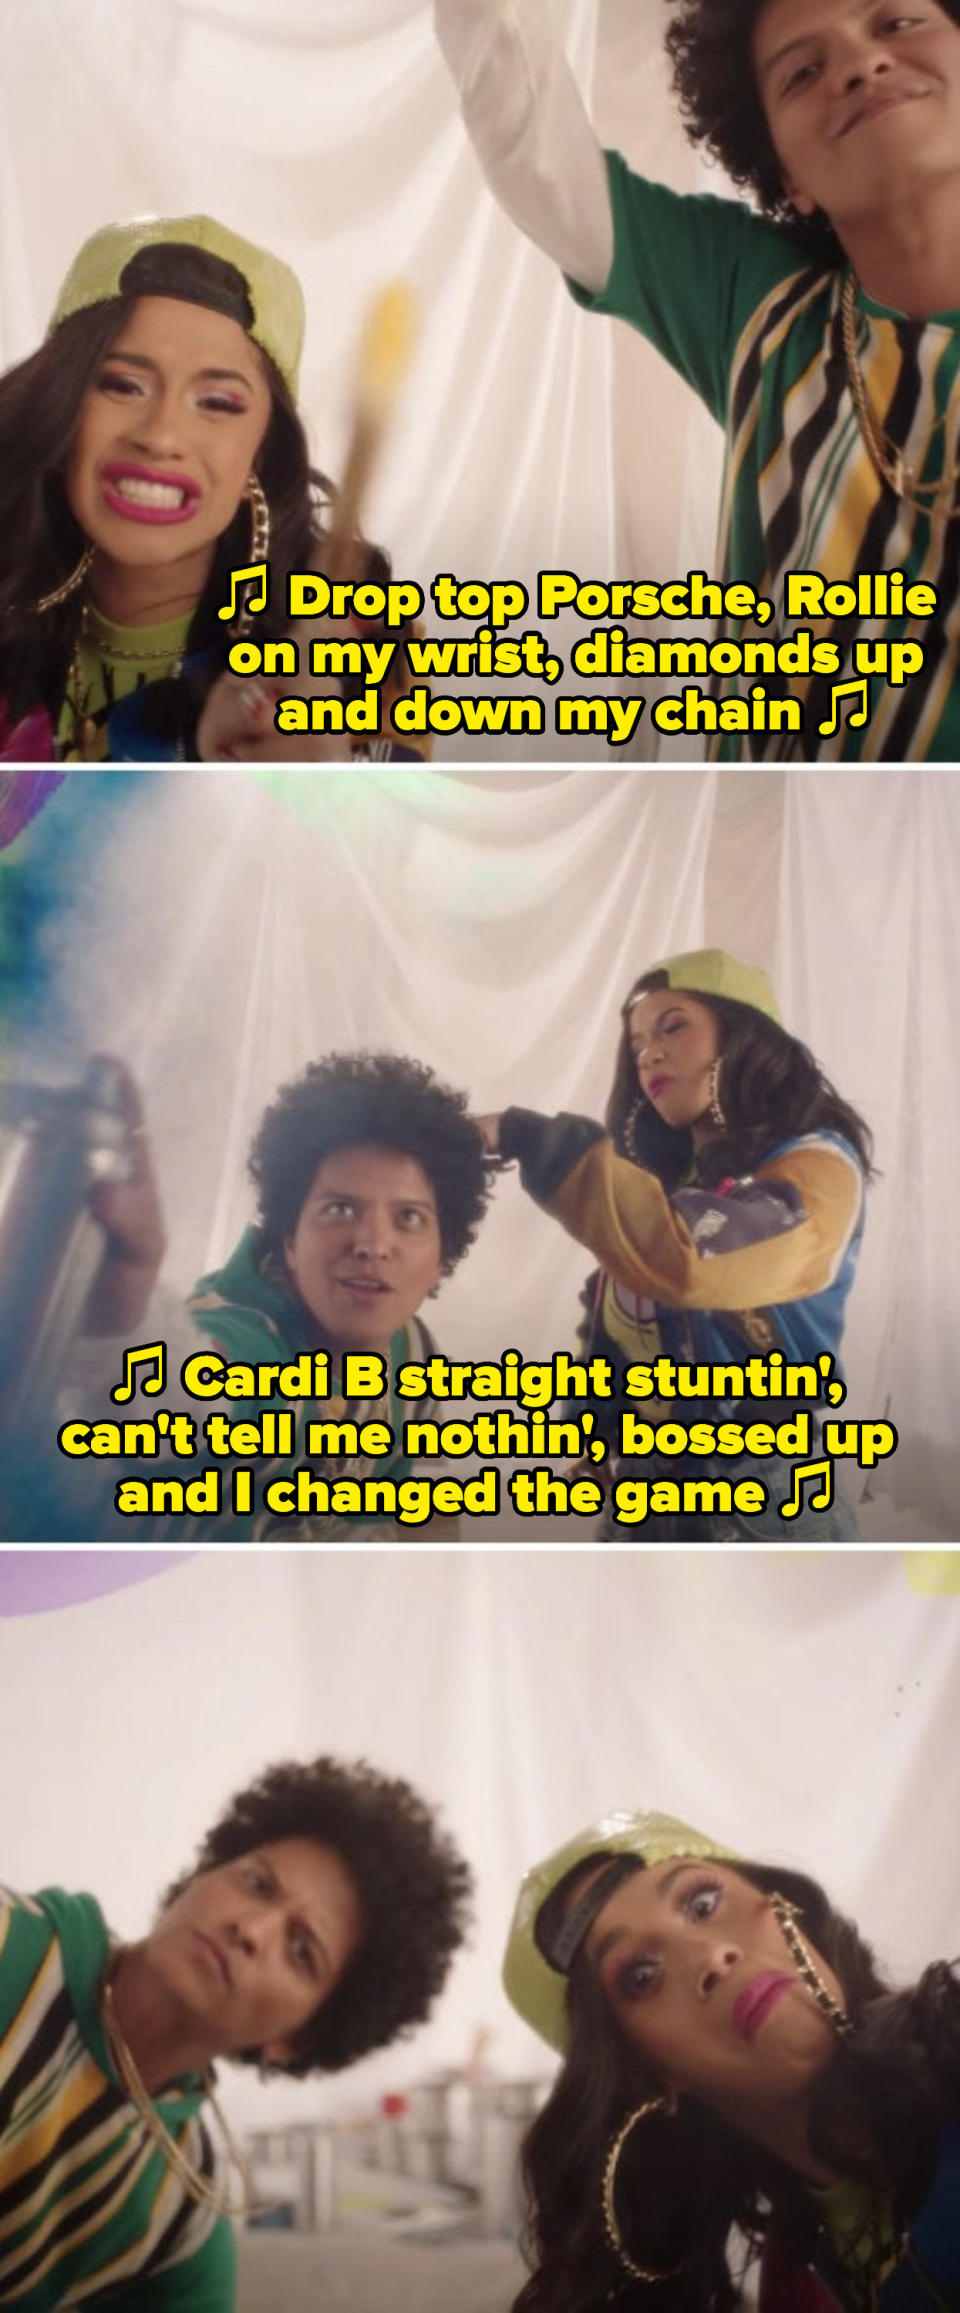 Cardi B and Bruno Mars in their "Finesse (Remix)" music video, rapping: "Cardi B straight stunin', can't tell me nothin', bossed up and I changed the game"